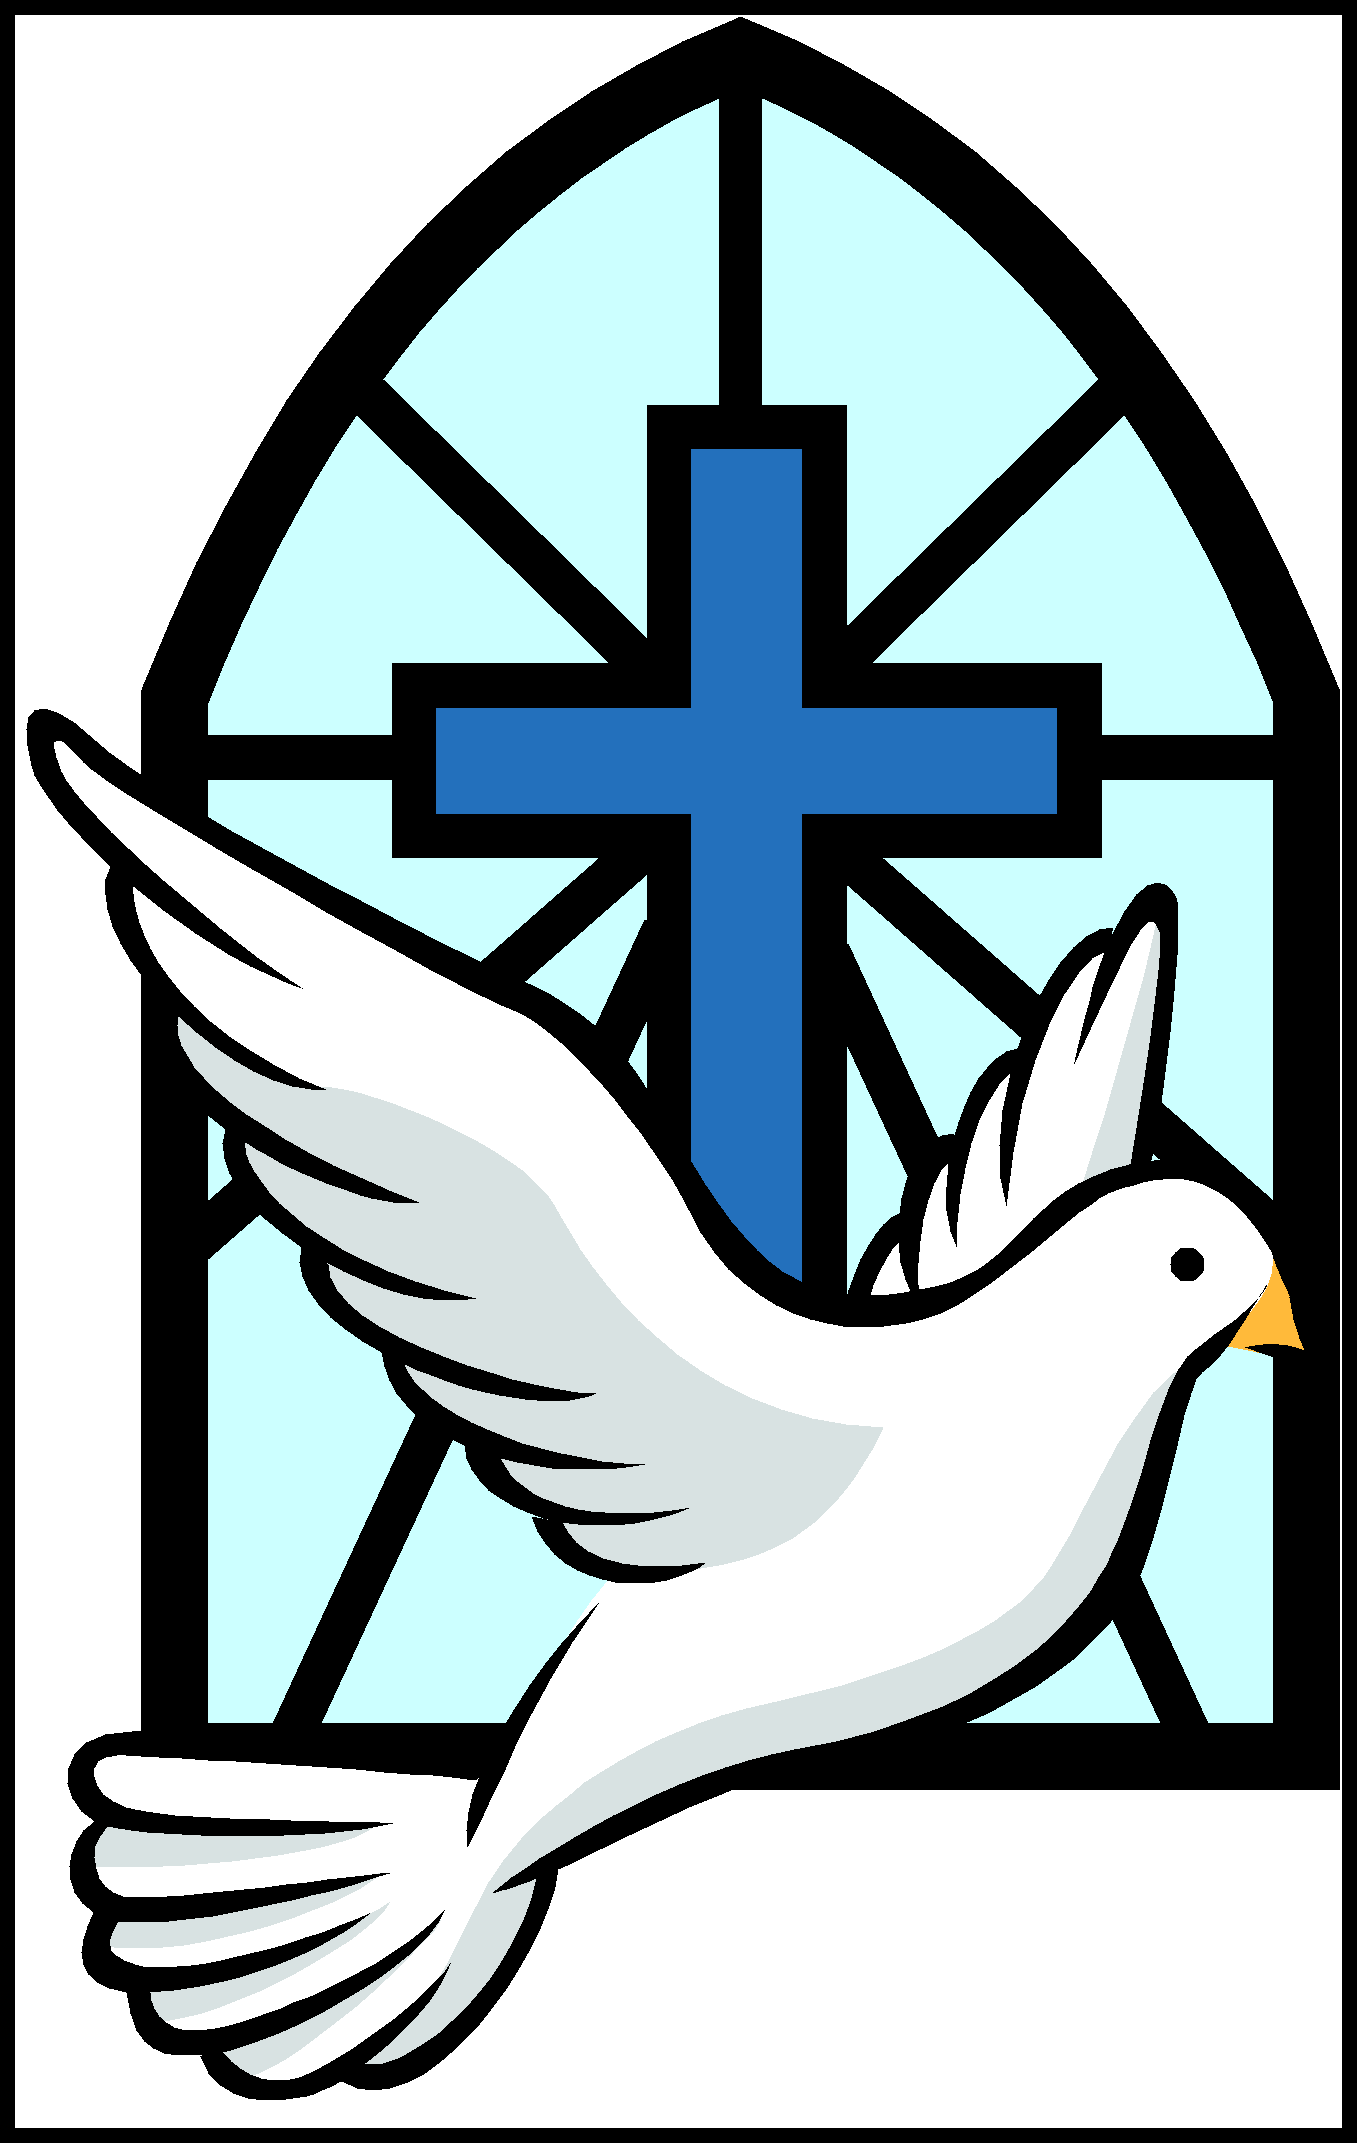 Doves clipart bible, Doves bible Transparent FREE for download on